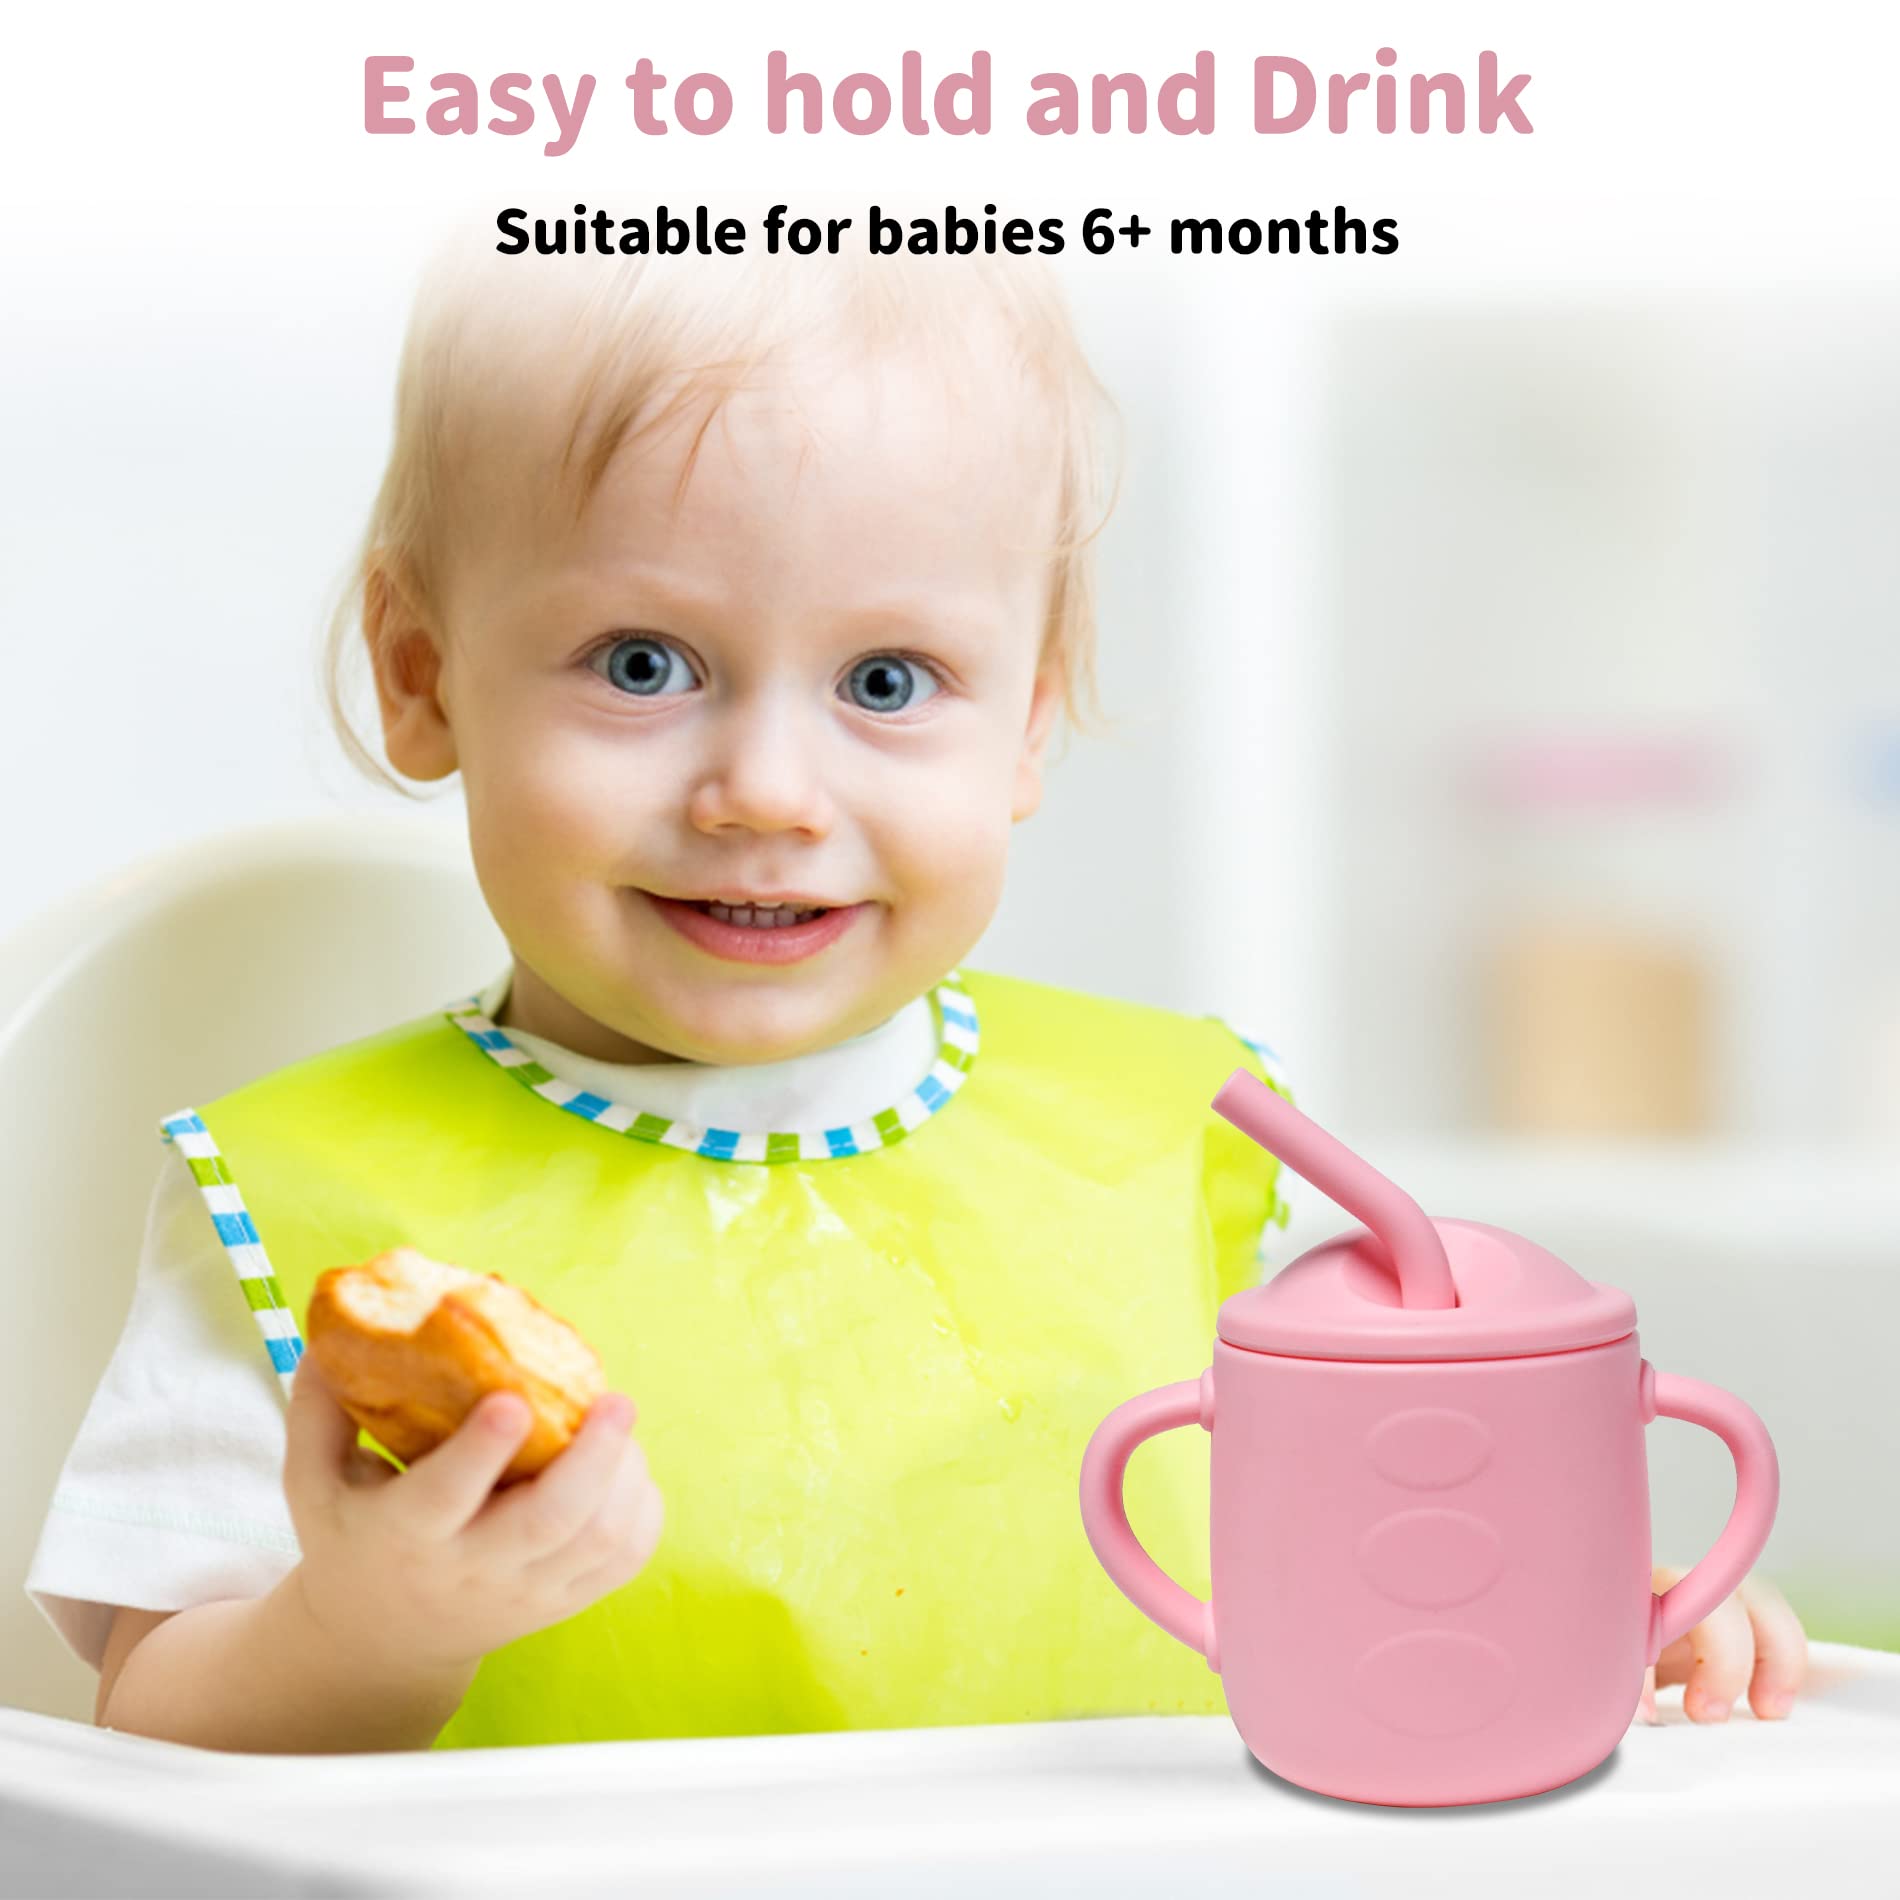 Adocham 100% Silicone Baby Cup With Straw & 2 Handles,Food Grade Toddler Infant Sippy Training Cups Spill Proof,BPA-Free,6 Months+,5oz (Pink)